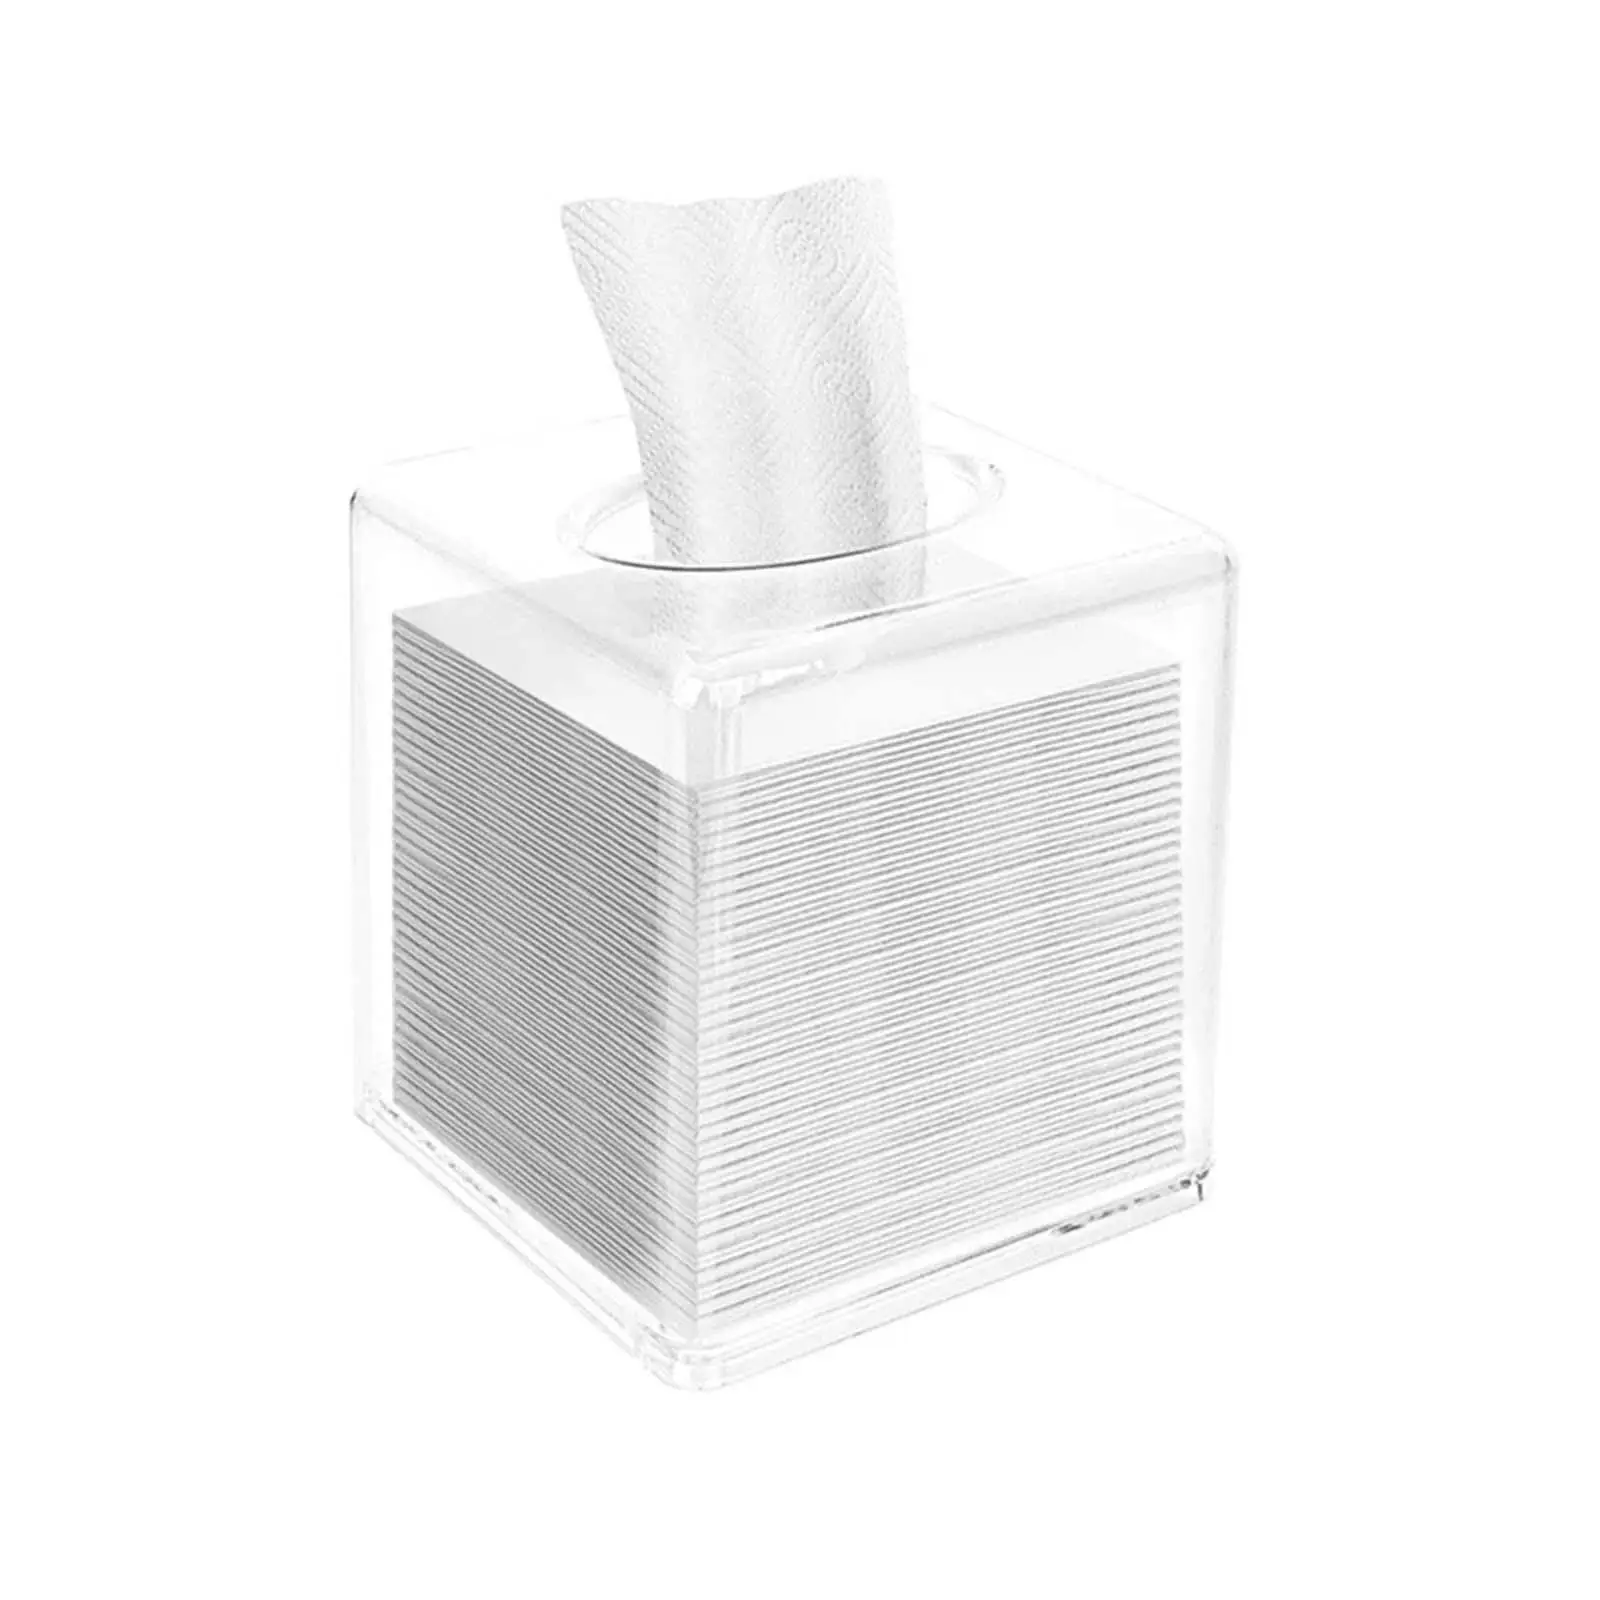 Square Acrylic Tissue Box Centerpieces Clear Durable Paper Napkin Holder Case for tabletop coffees Dining Room Hotel Decoration